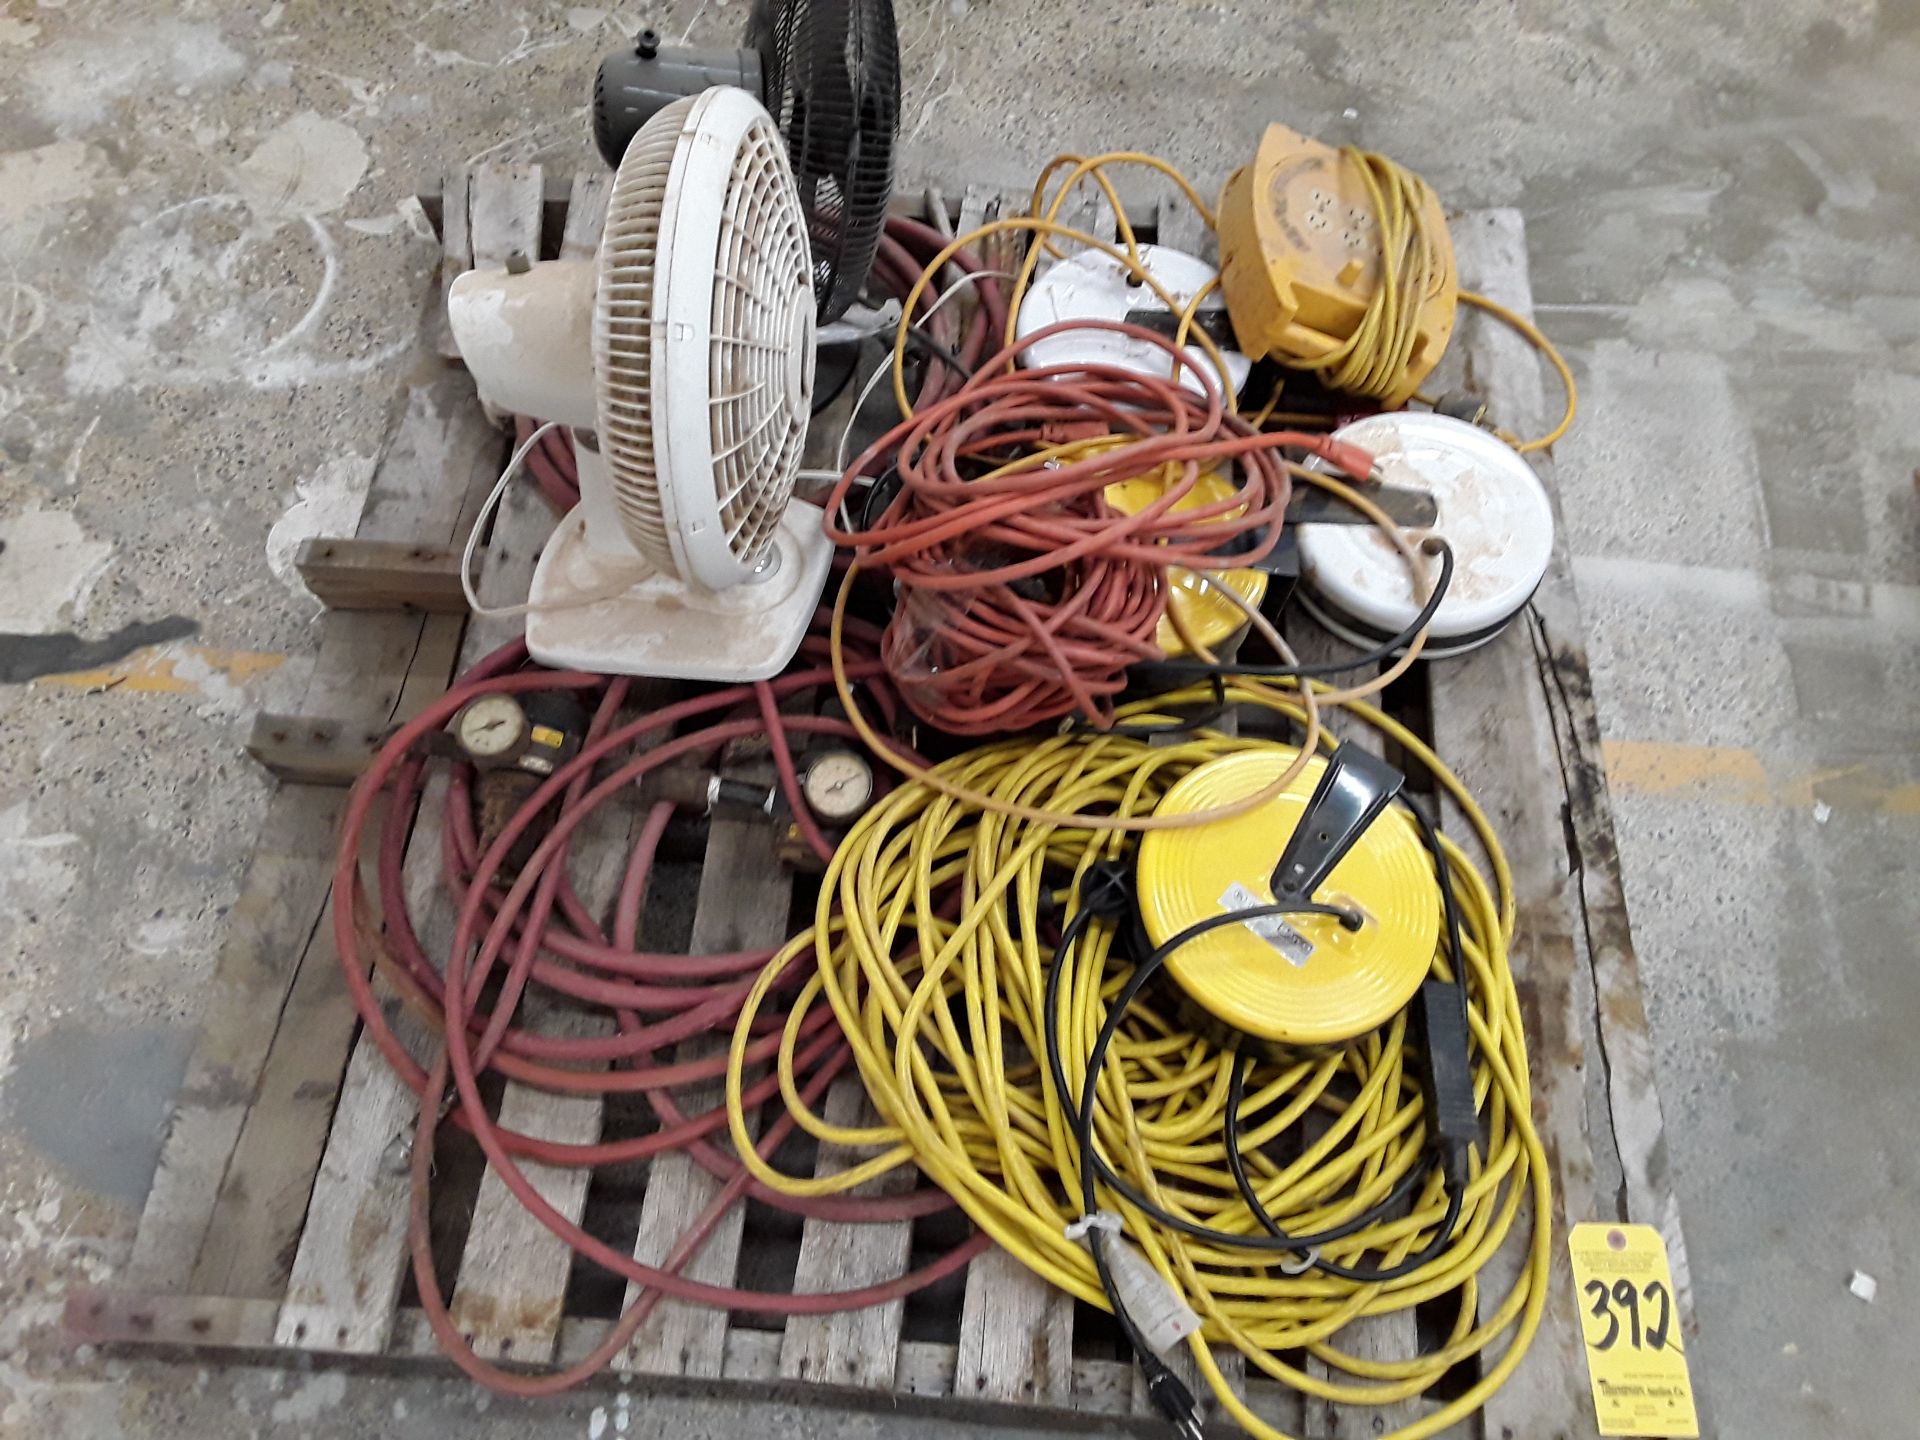 Skid Lot of Cord Reels, Extension Cords, and Fans